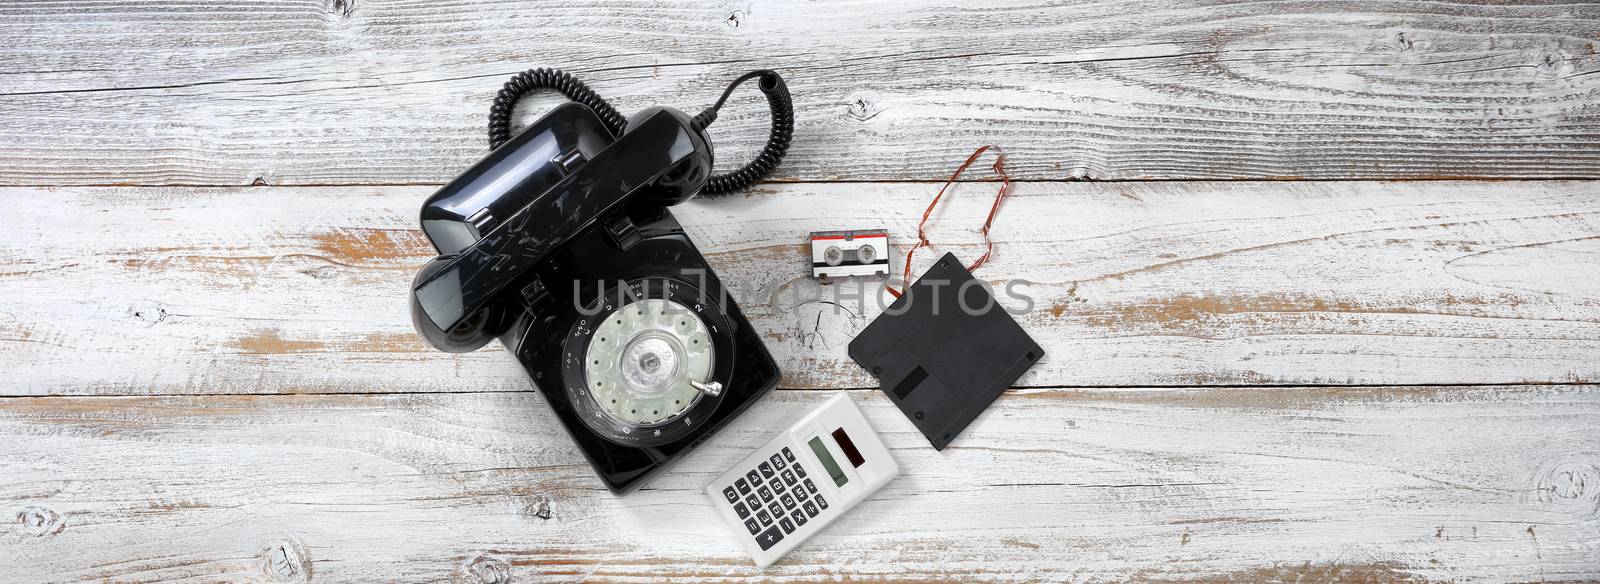 Vintage technology includes rotary dial phone and old data disk  by tab1962